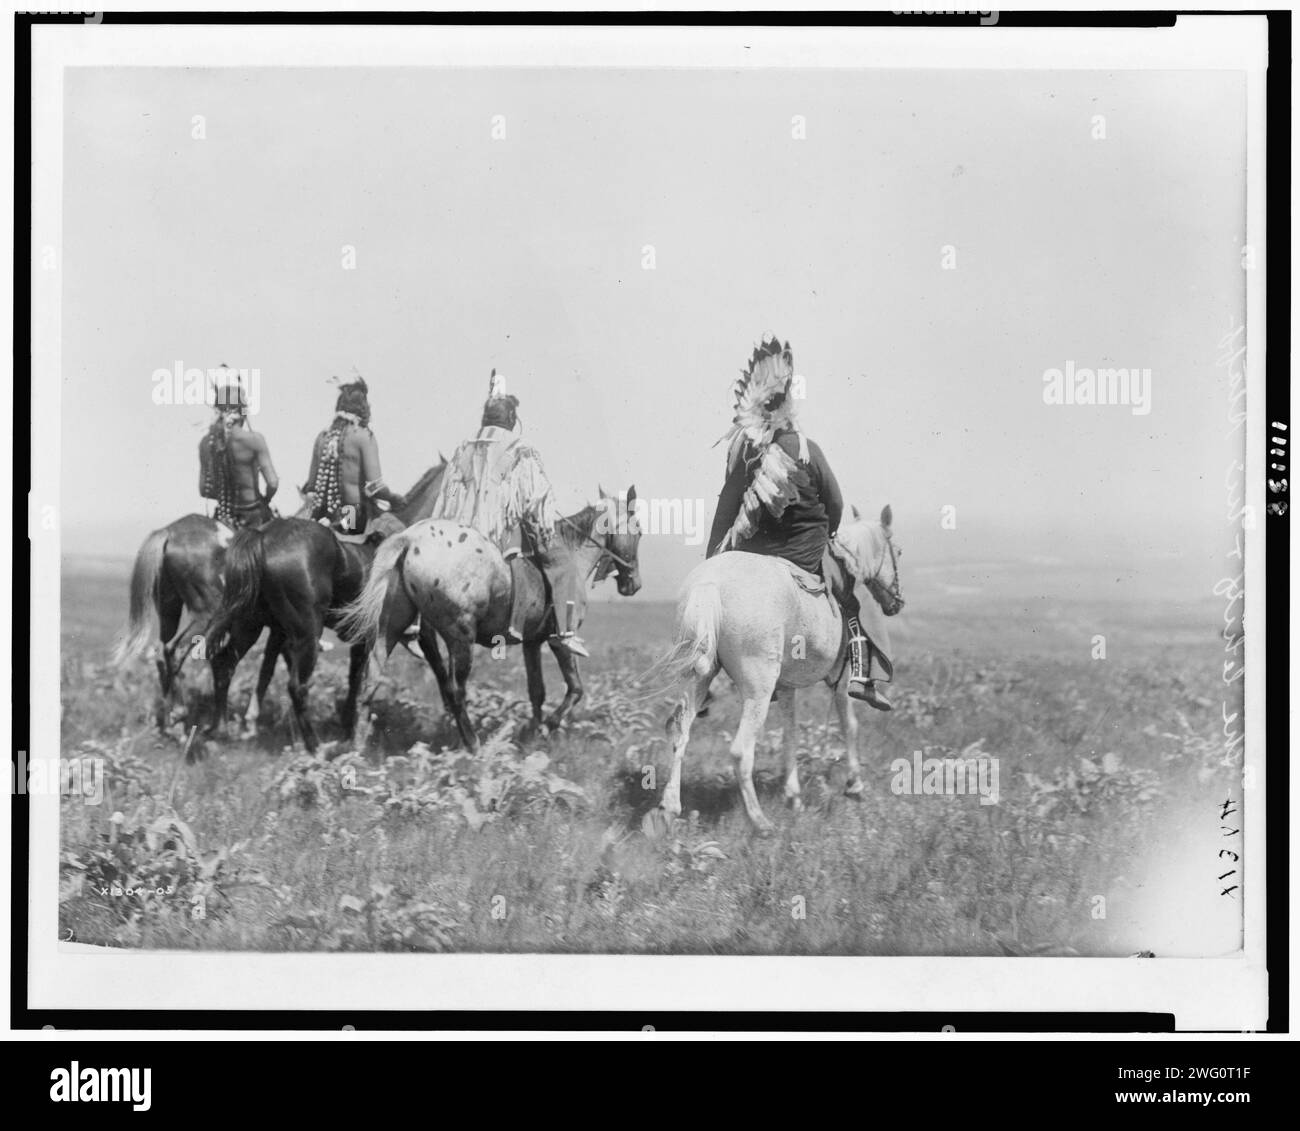 The chief and his staff, Apsaroke Indians, c1905. Rear view of four Apsaroke Indians on horseback Stock Photo